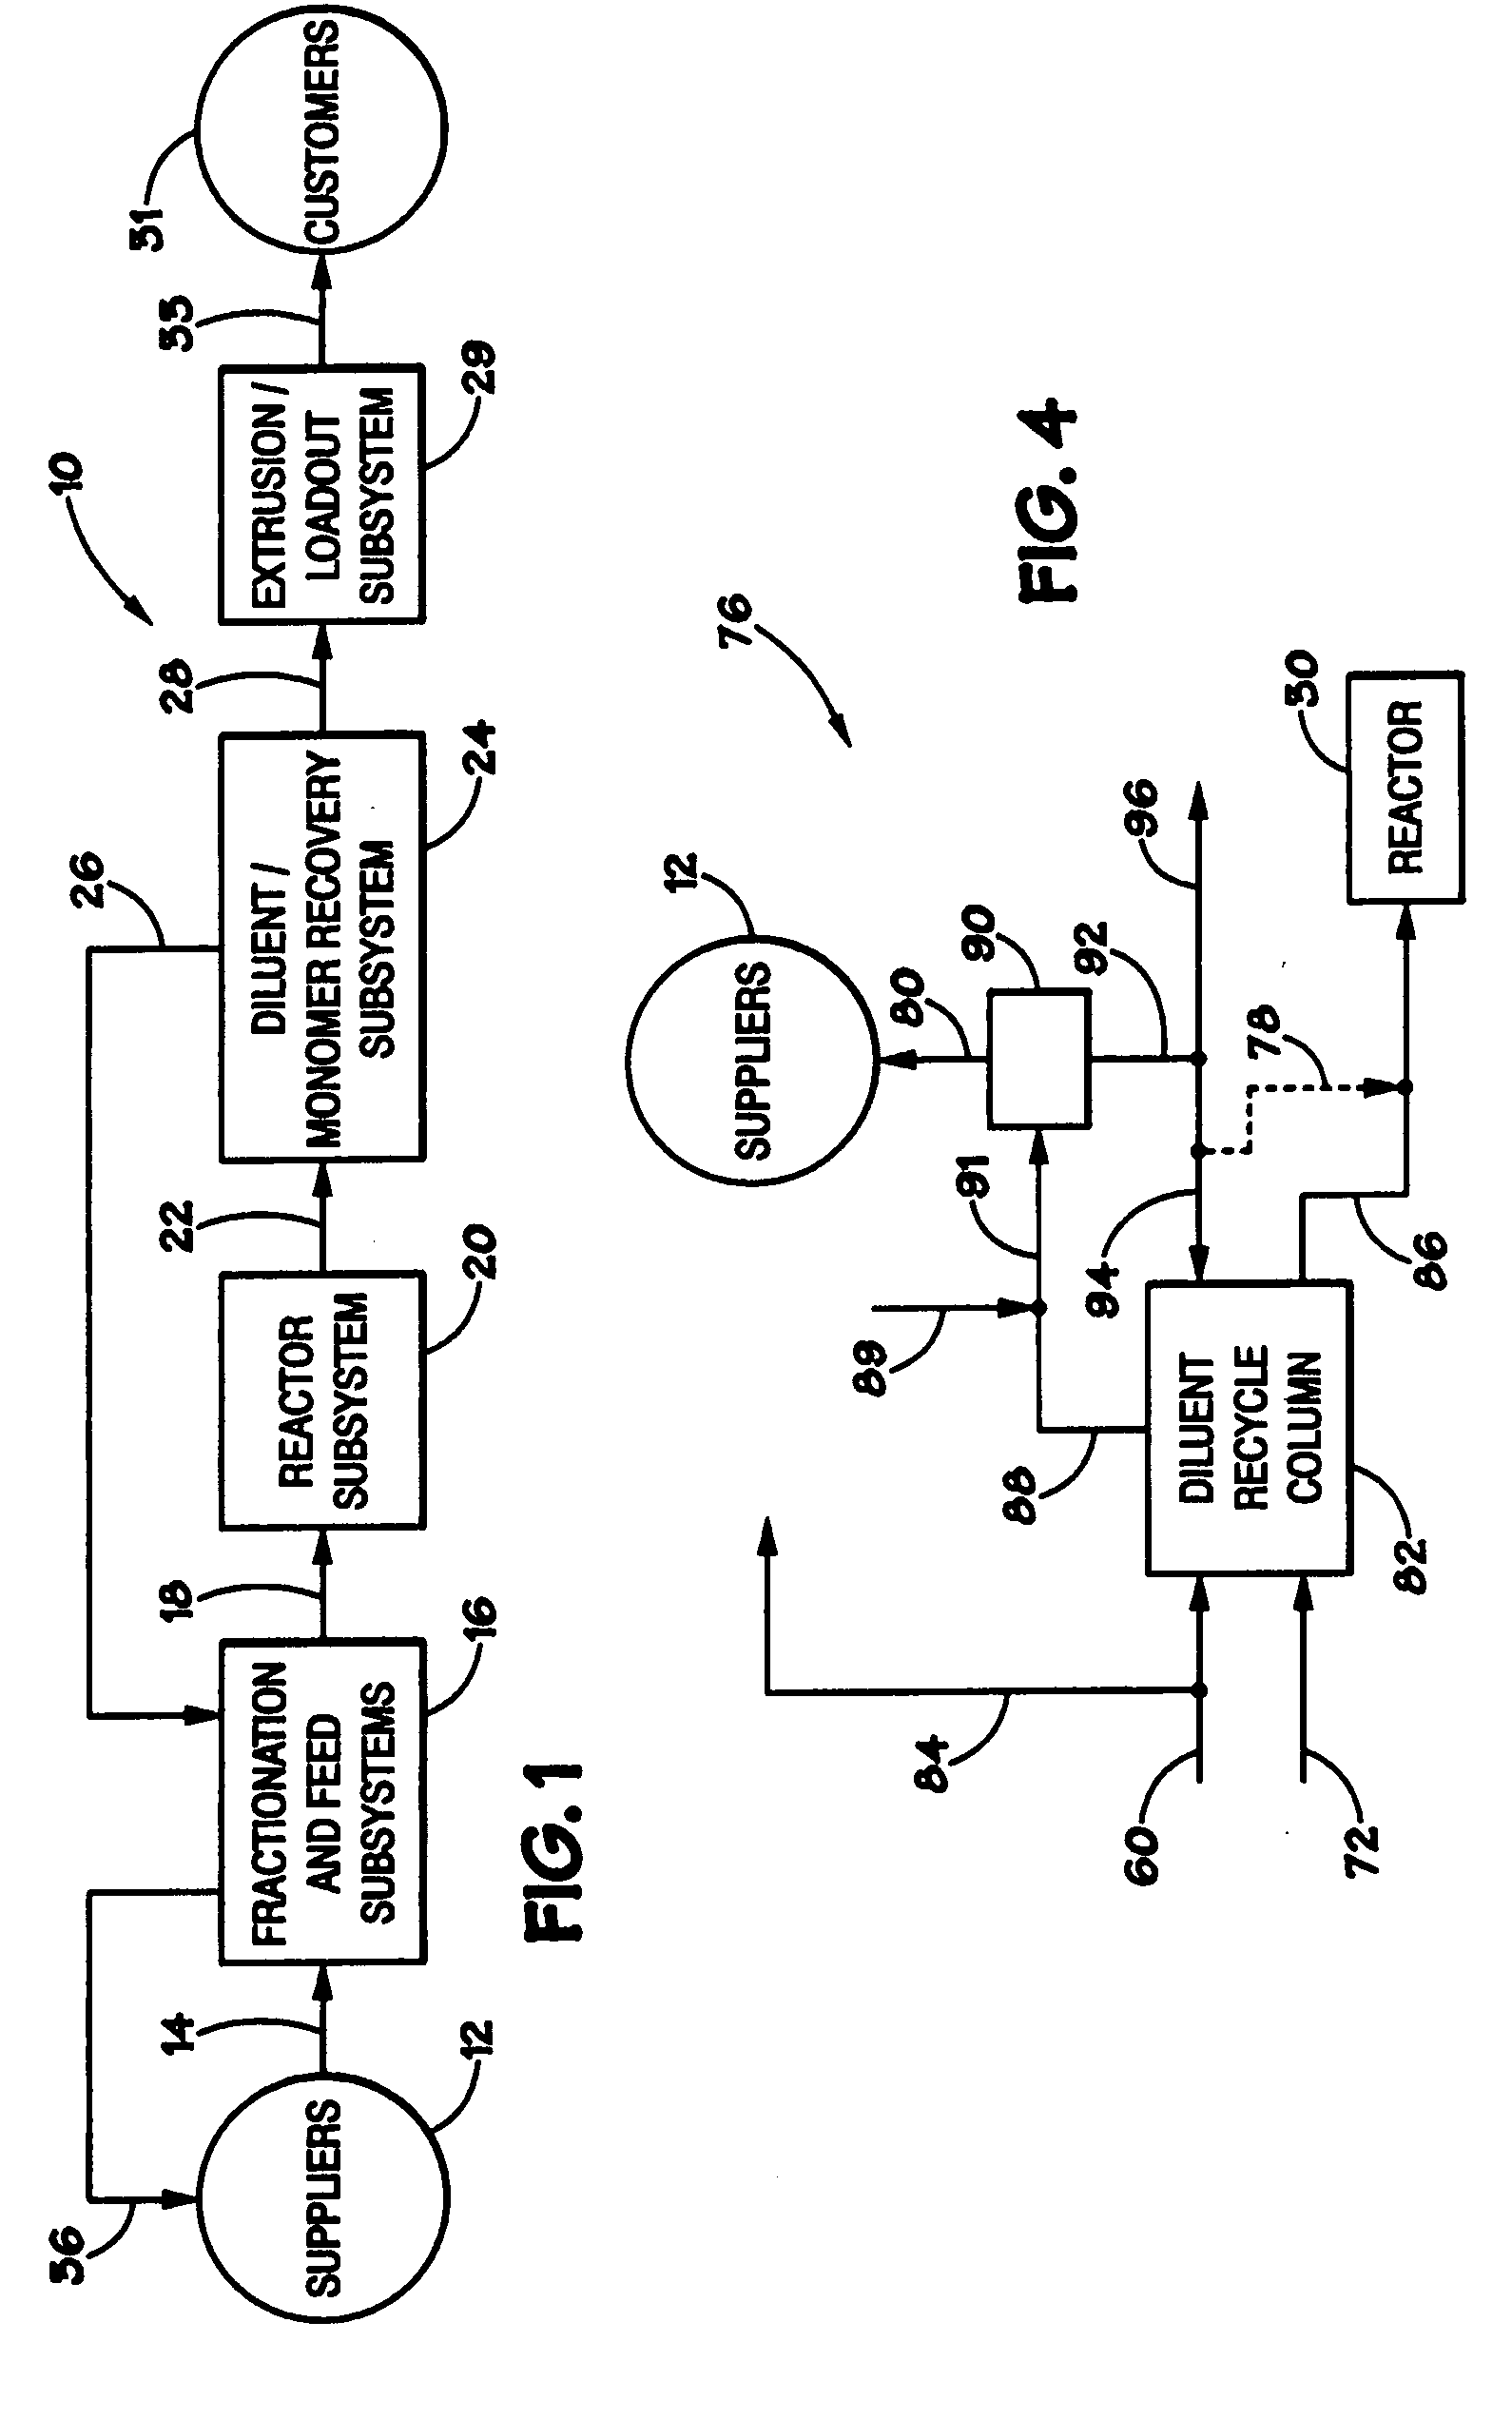 Monomer recovery by returning column overhead liquid to the reactor